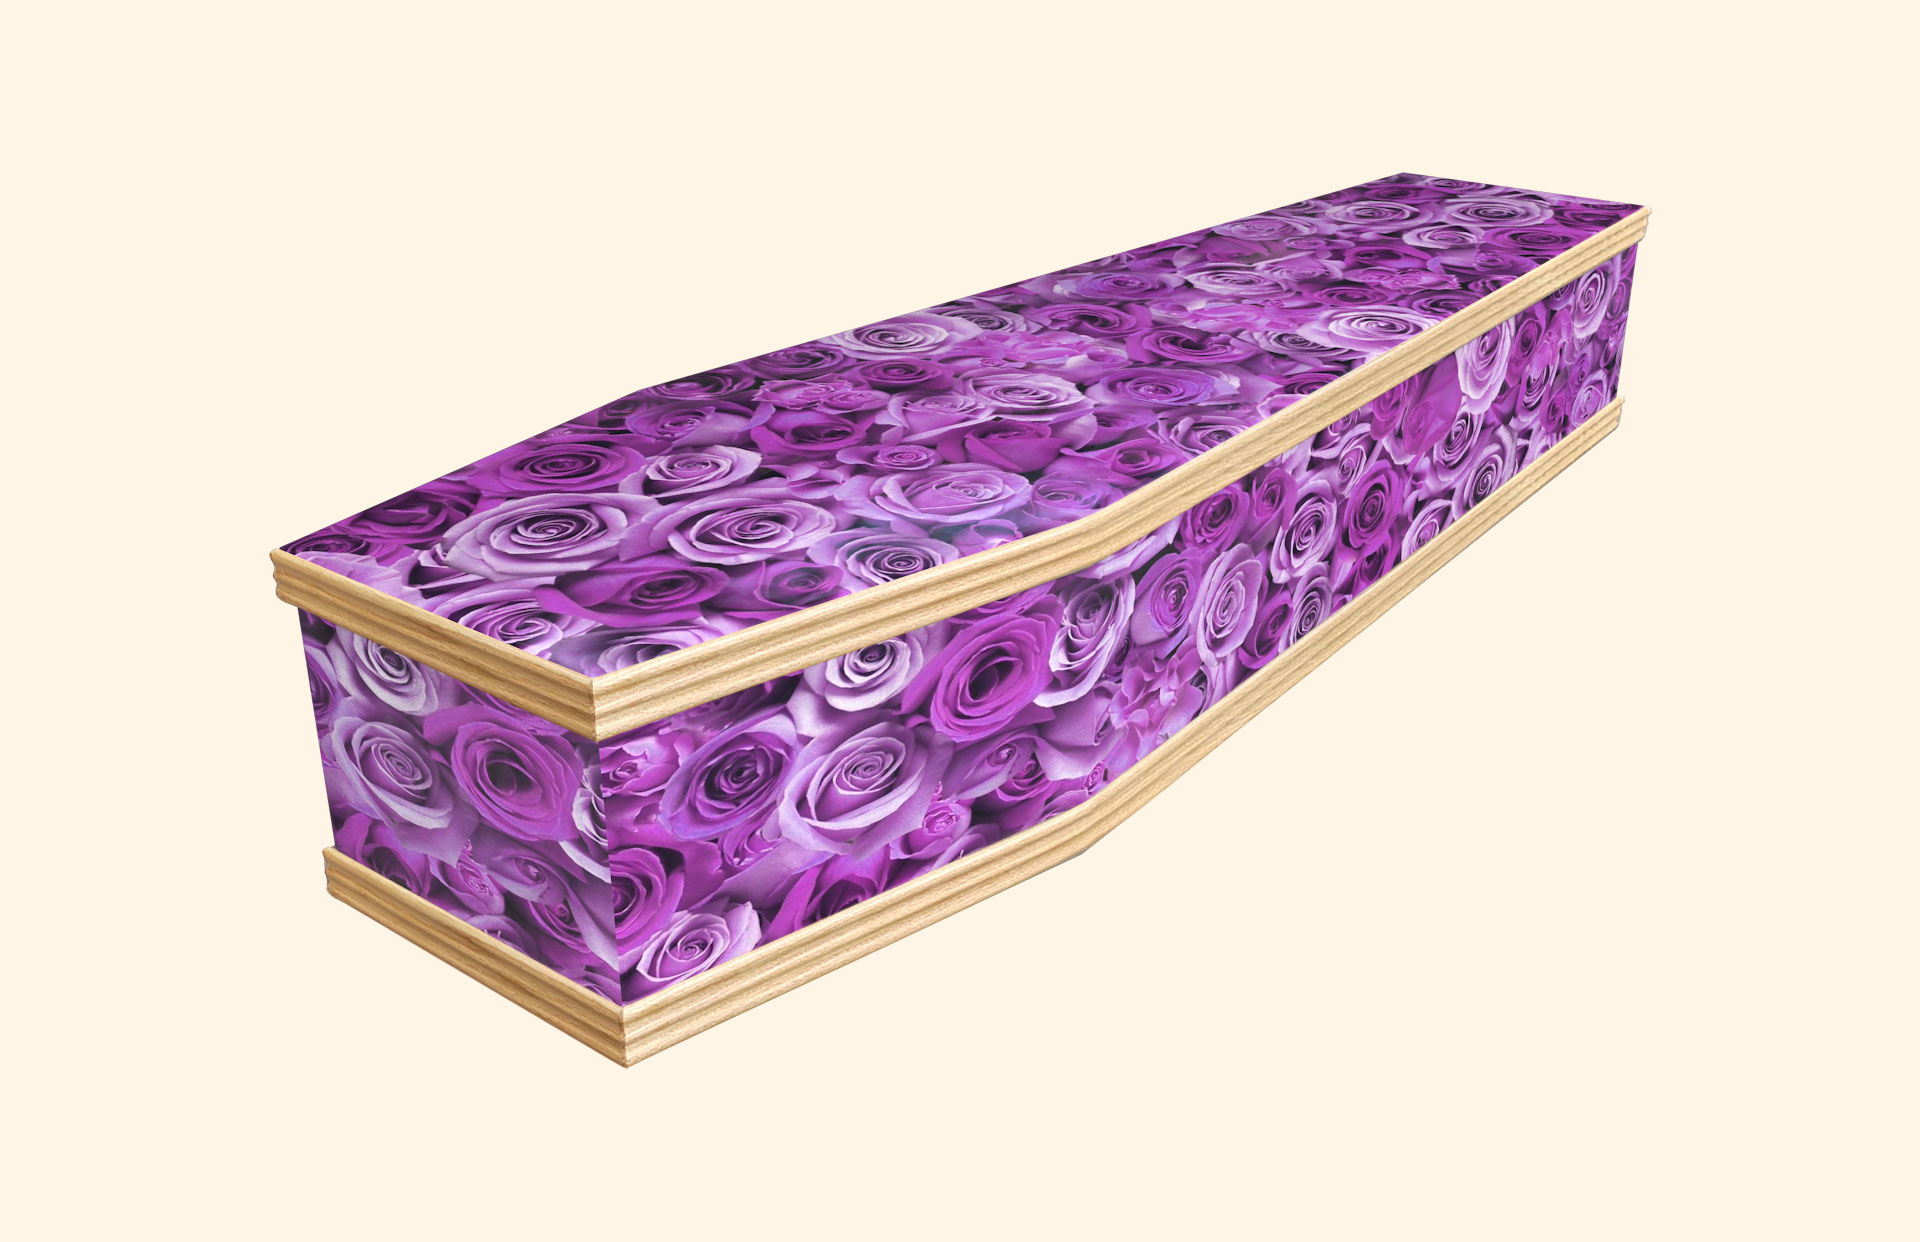 Lilac Roses design on a classic coffin